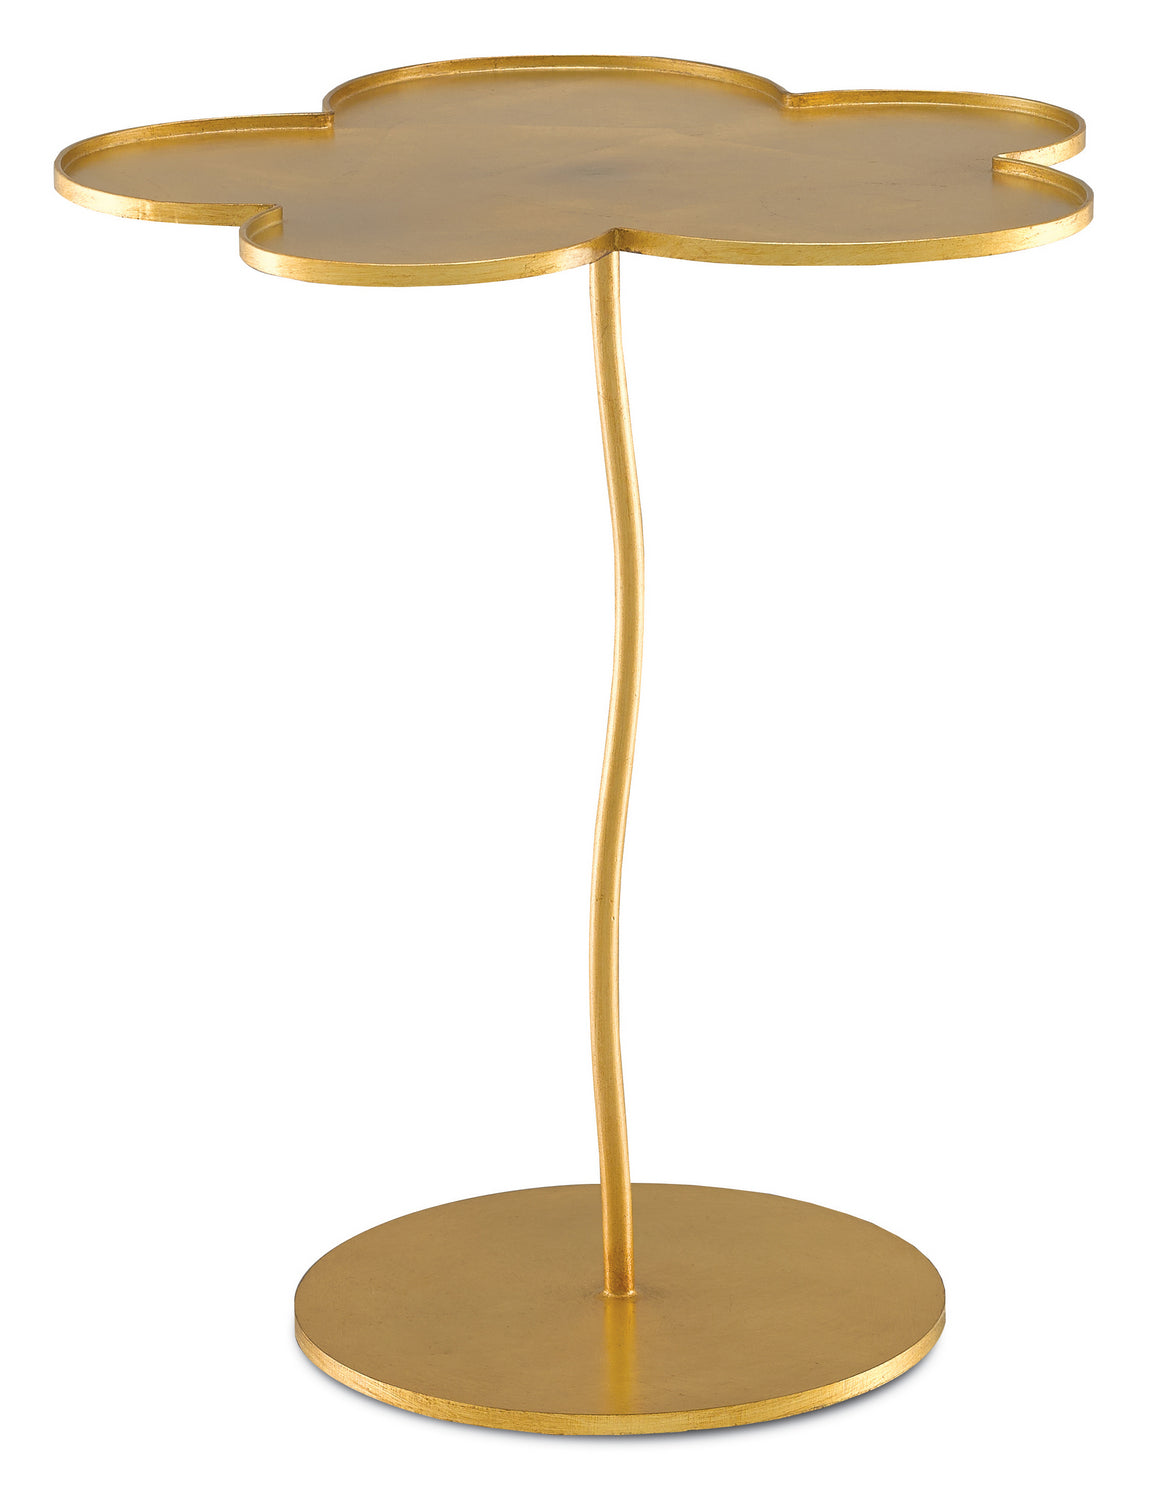 Currey and Company - Accent Table - Fleur - Gold Leaf- Union Lighting Luminaires Decor